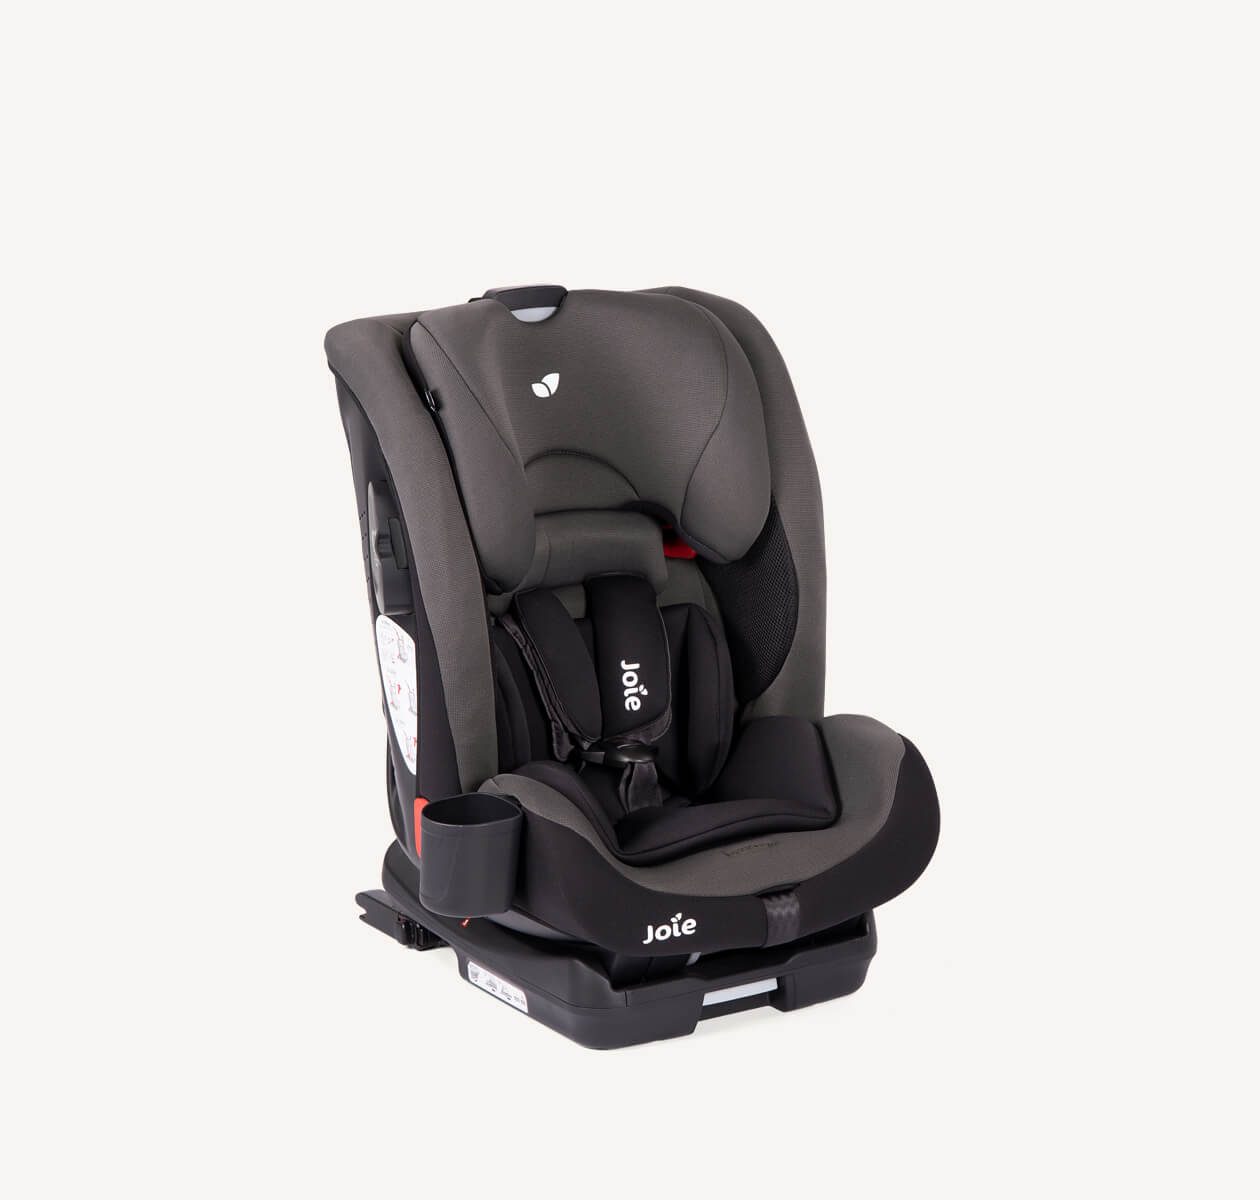 Joie bold toddler car seat in dark gray from a right angle.